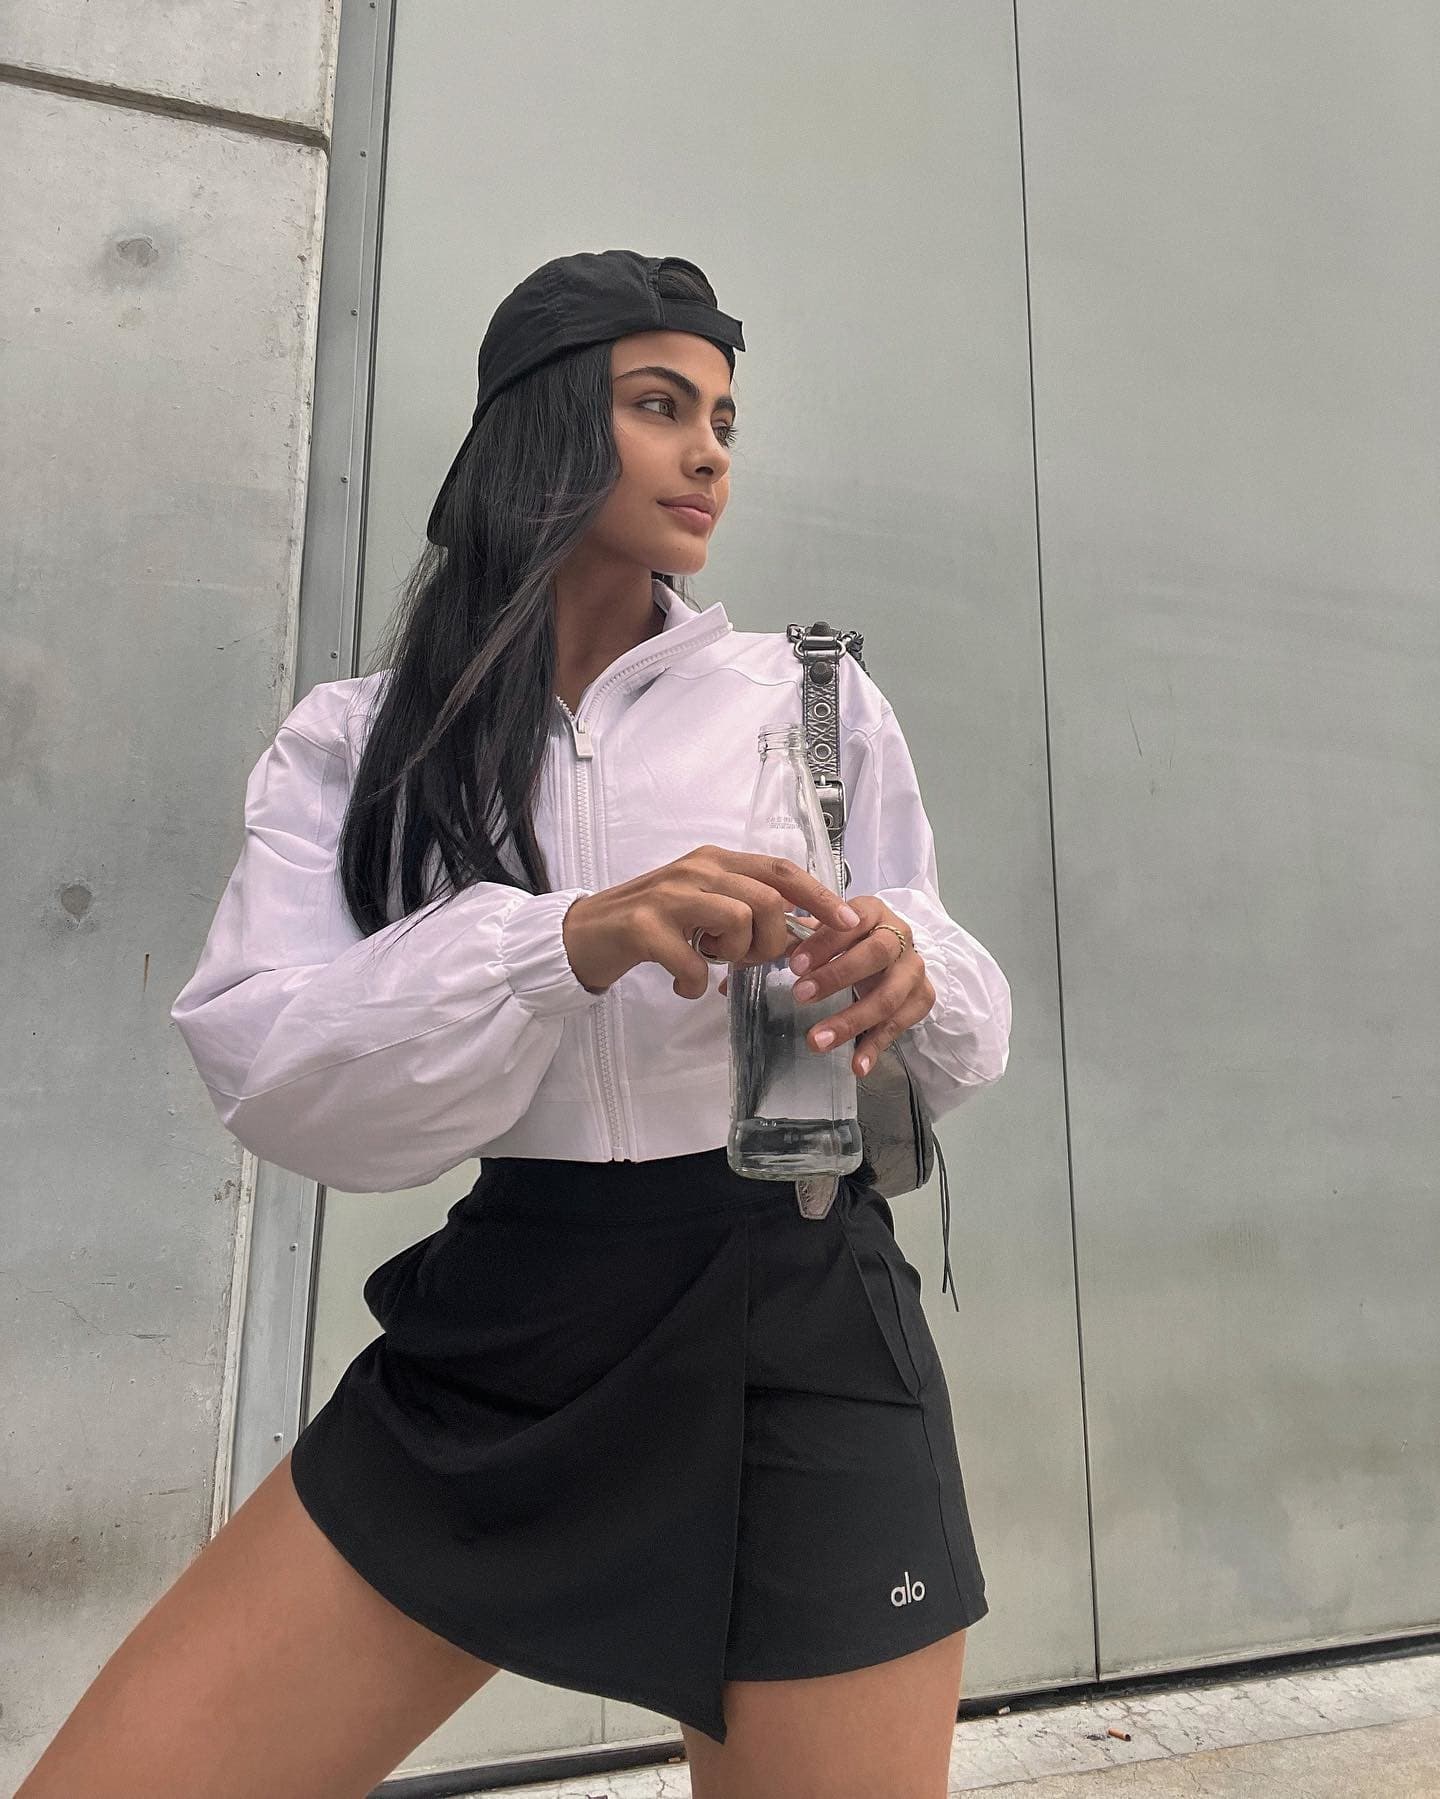 @saraorrego wear a black high-waisted activewear skort with a cropped full-zip jacket while posing with a glass water bottle against a concrete wall. 